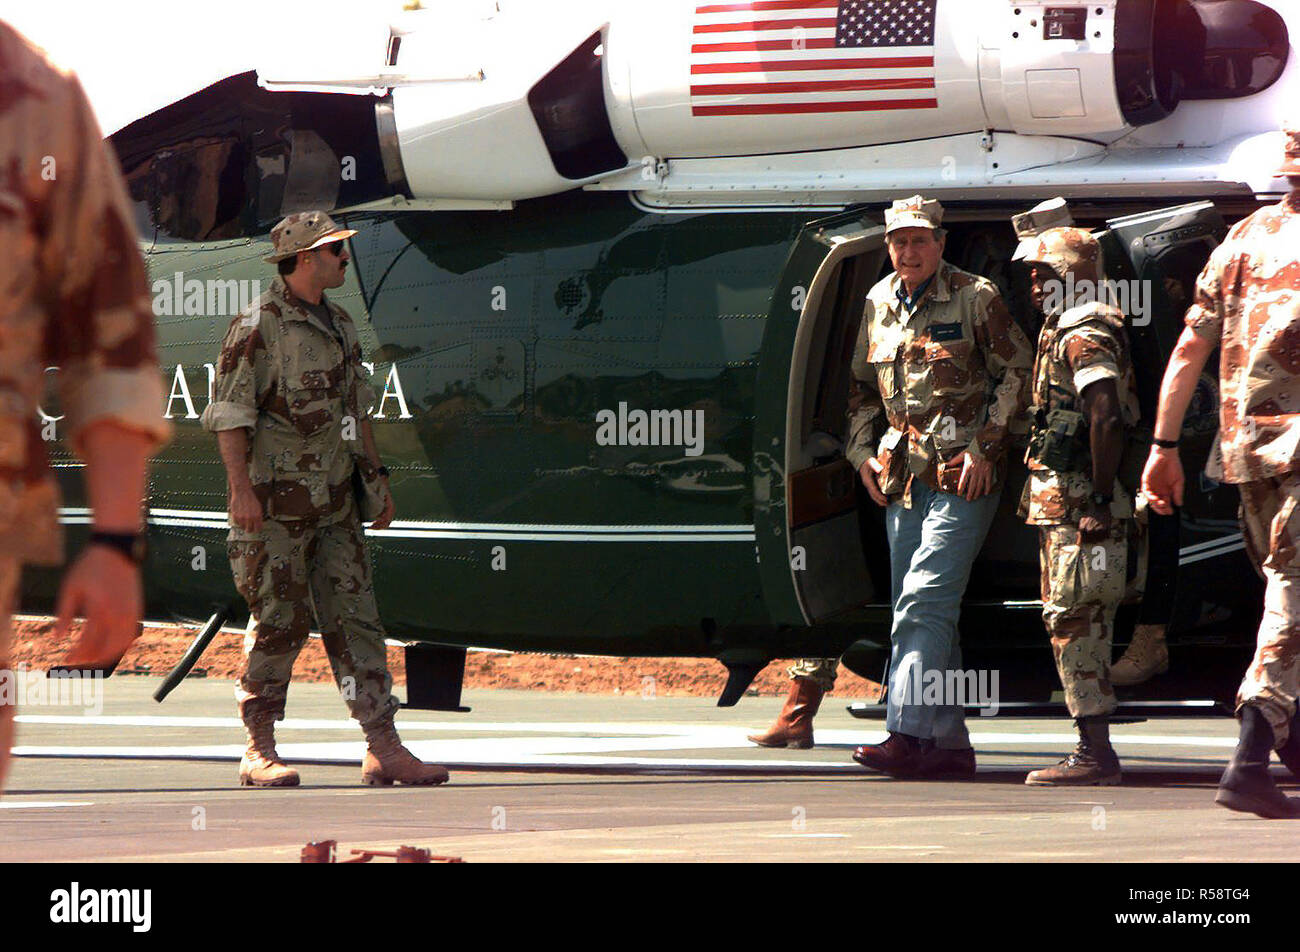 1992 - President George Bush arrives at the American Embassy Compound on an UH-60 Blackhawk helicopter. Stock Photo